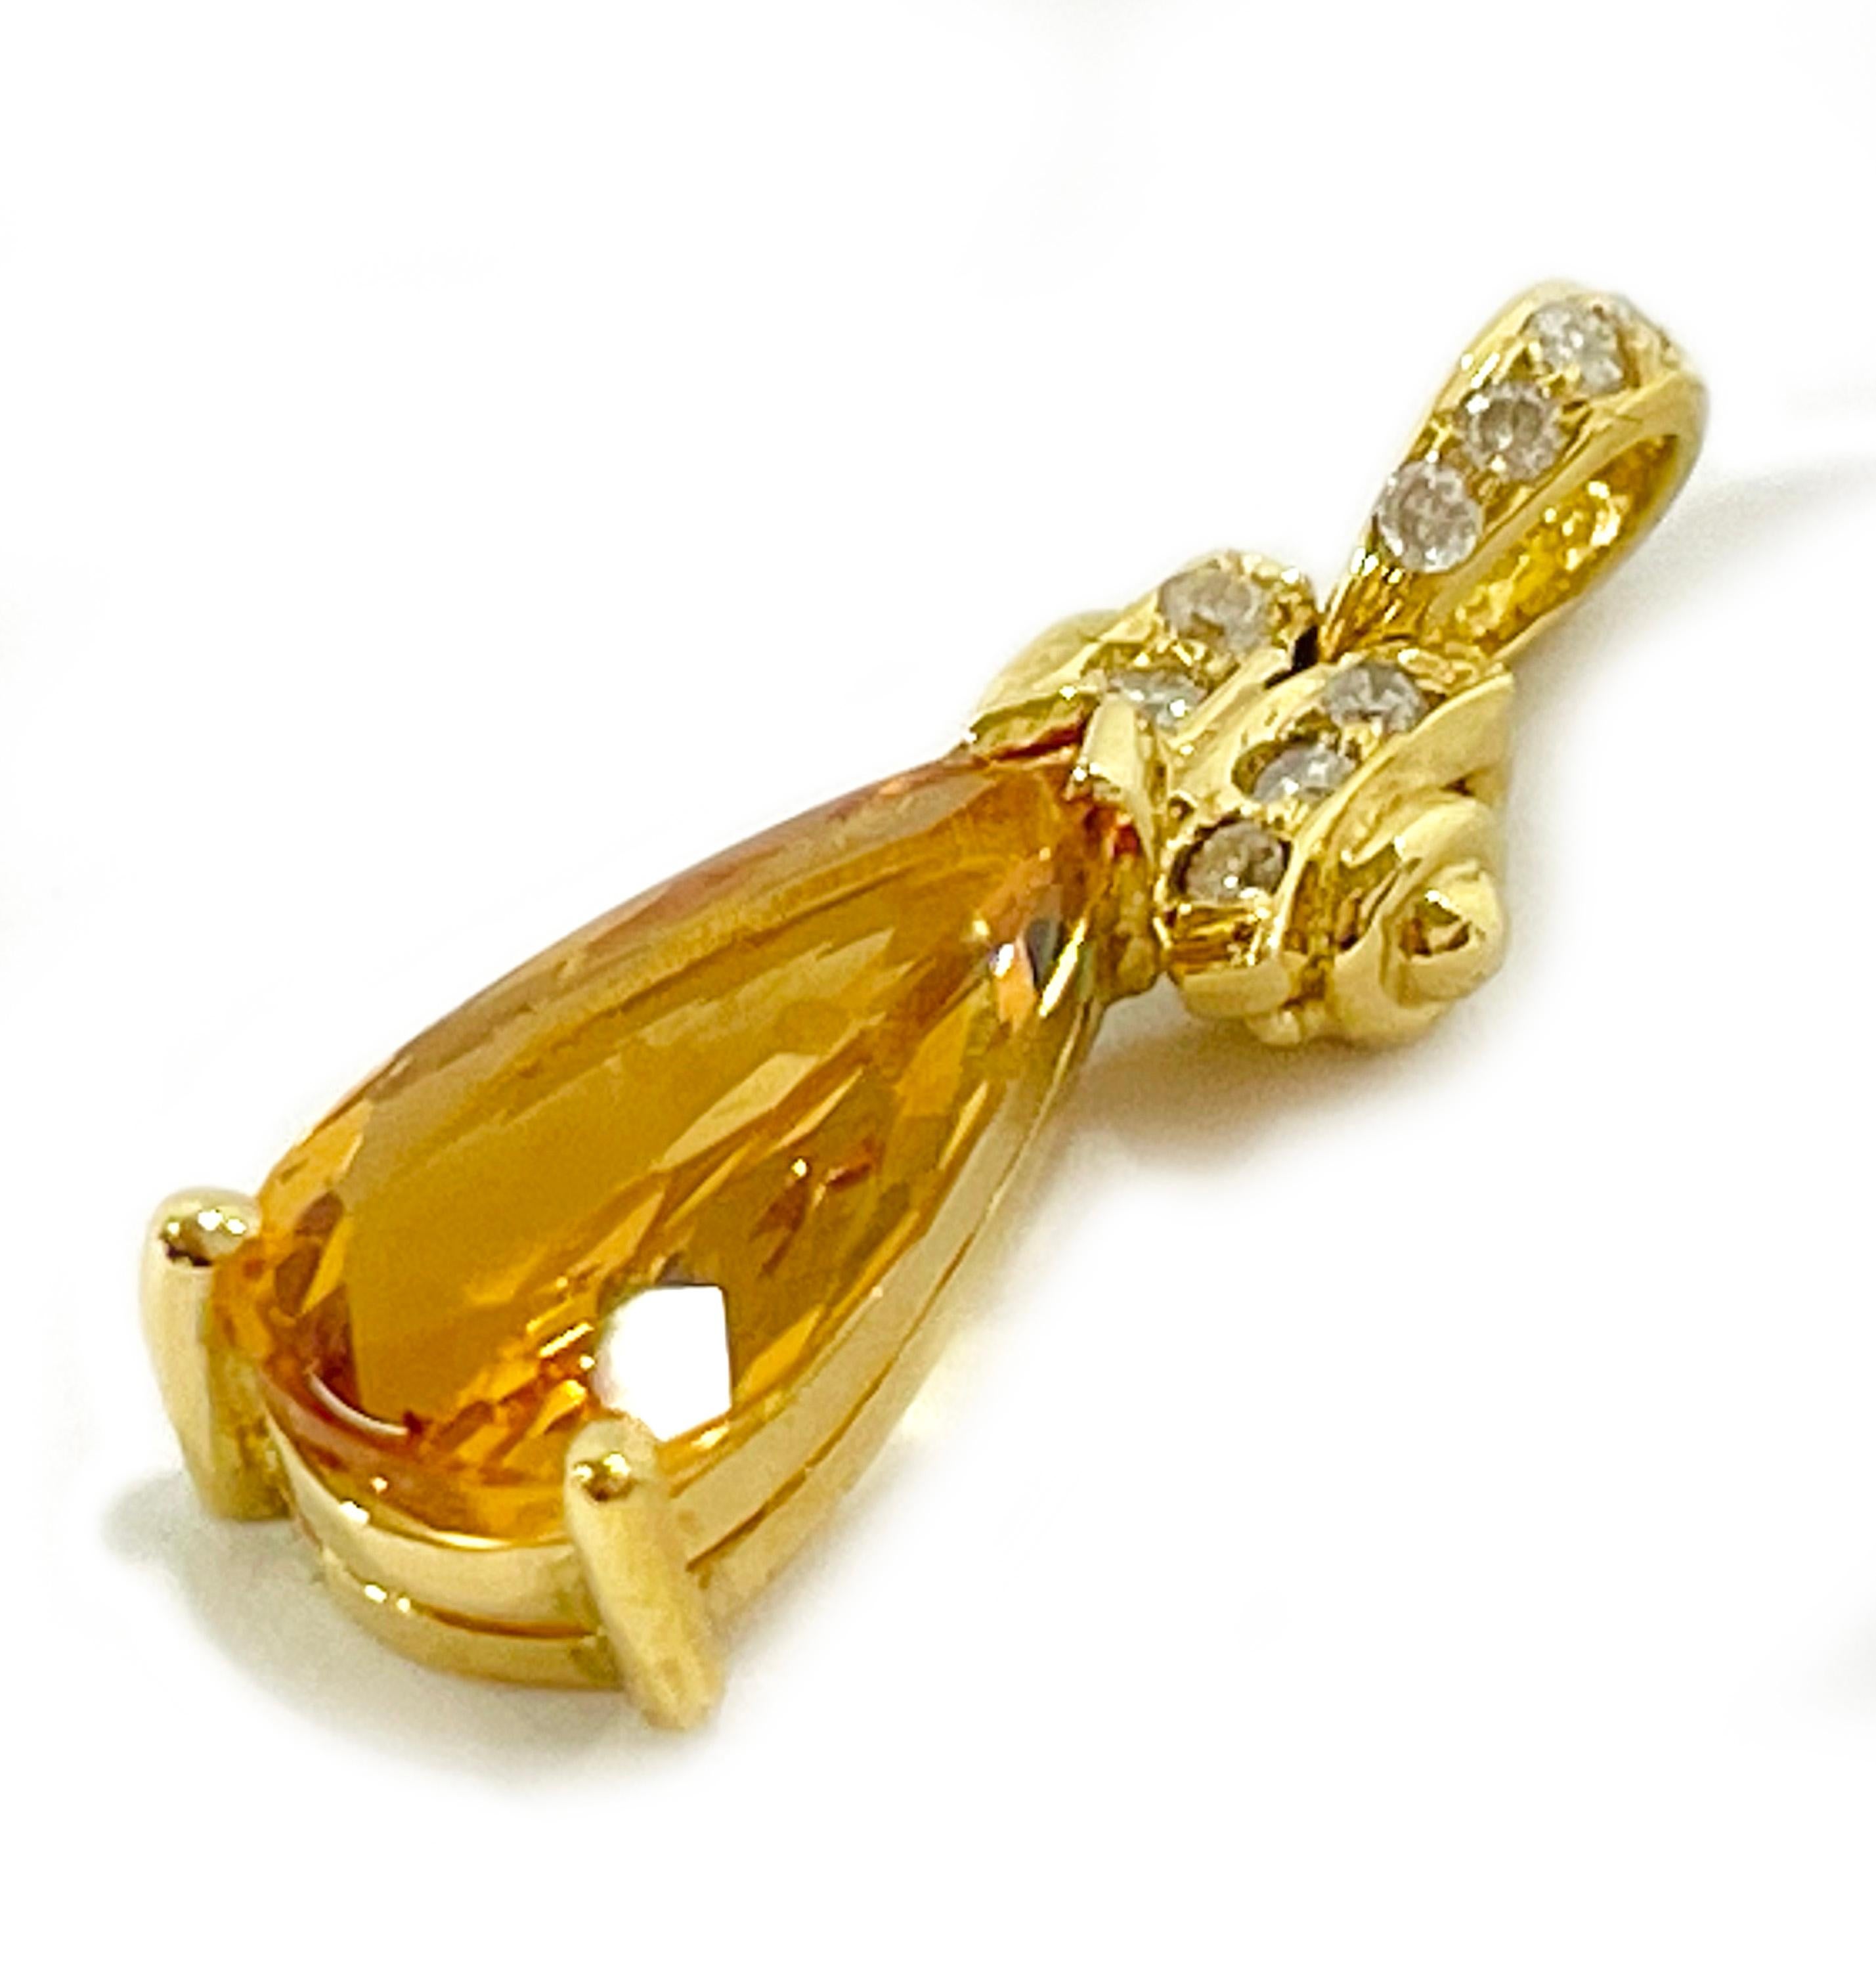 18 Karat Yellow Gold Imperial Topaz Diamond Pendant. The beautiful pendant features a pear-shaped Imperial Topaz on a basket setting with a total of ten round diamonds set above the basket and on the bail. The topaz measures 13.16 x 6.62mm for a